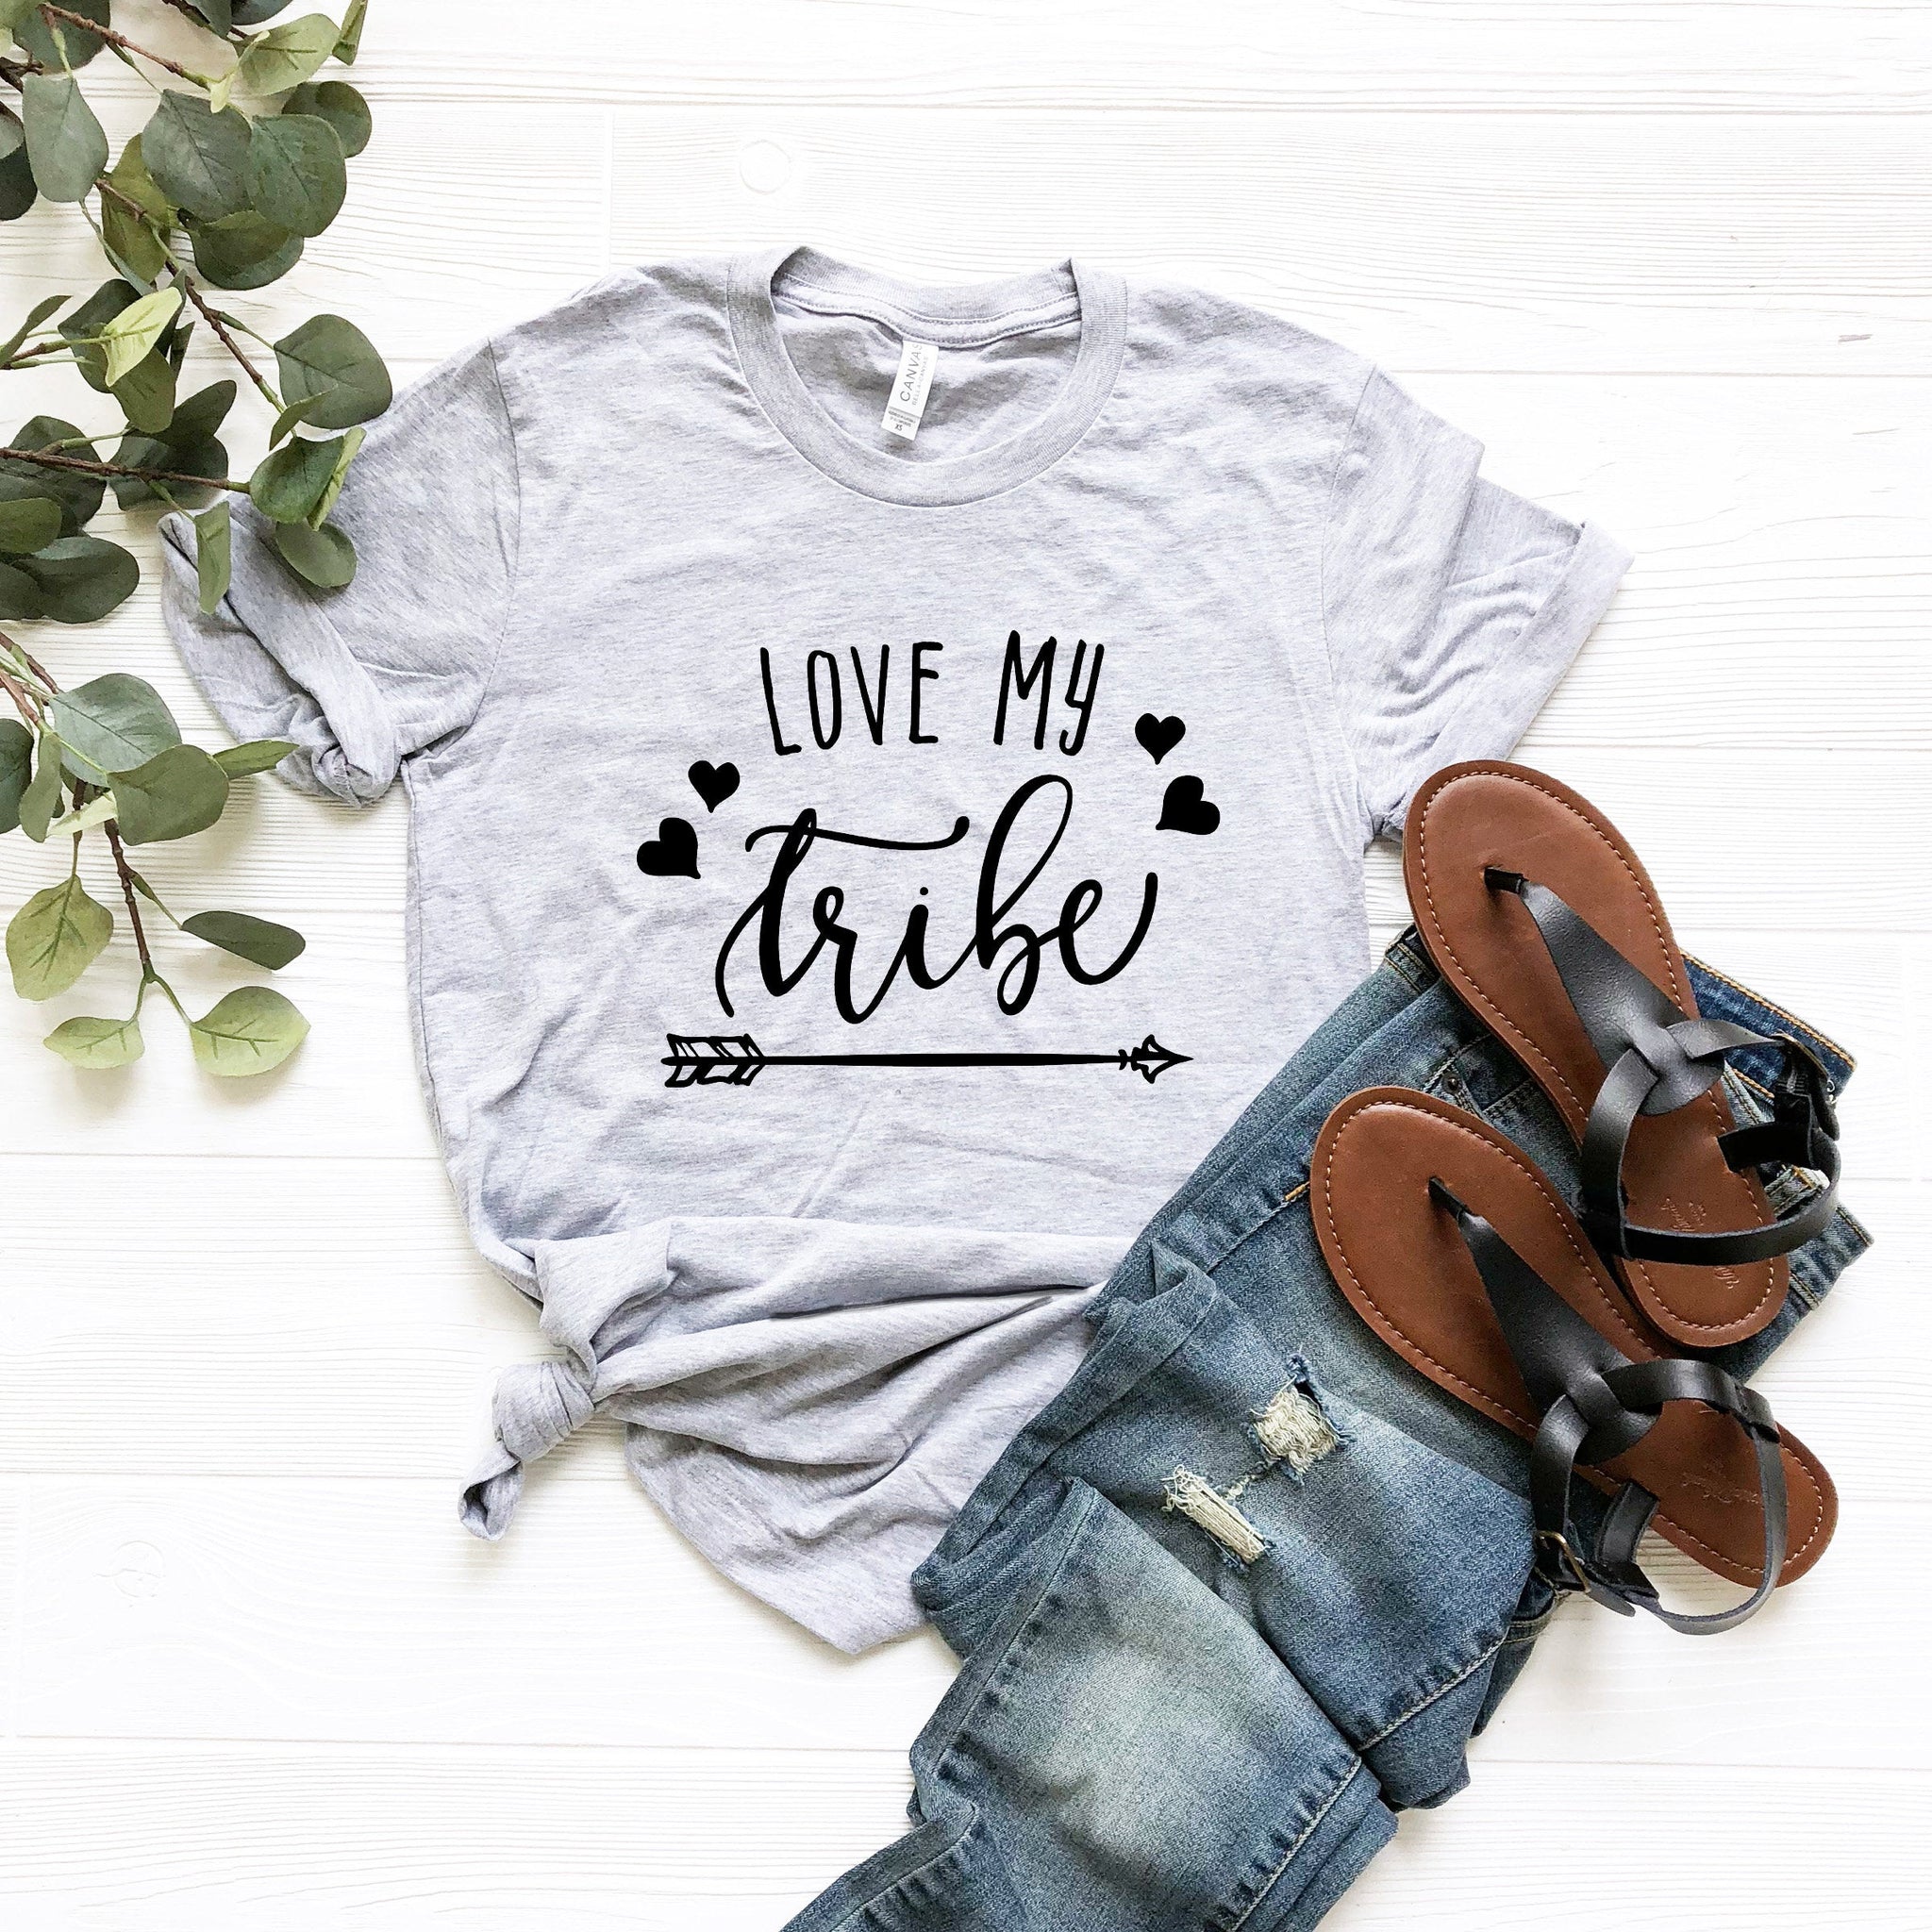 Love My Family, Family shirt, Wife Shirt, Love My Tribe, Gift For Her, Gift For Him, Funny Shirt, Wife Shirt, Husband Shirt - Fastdeliverytees.com